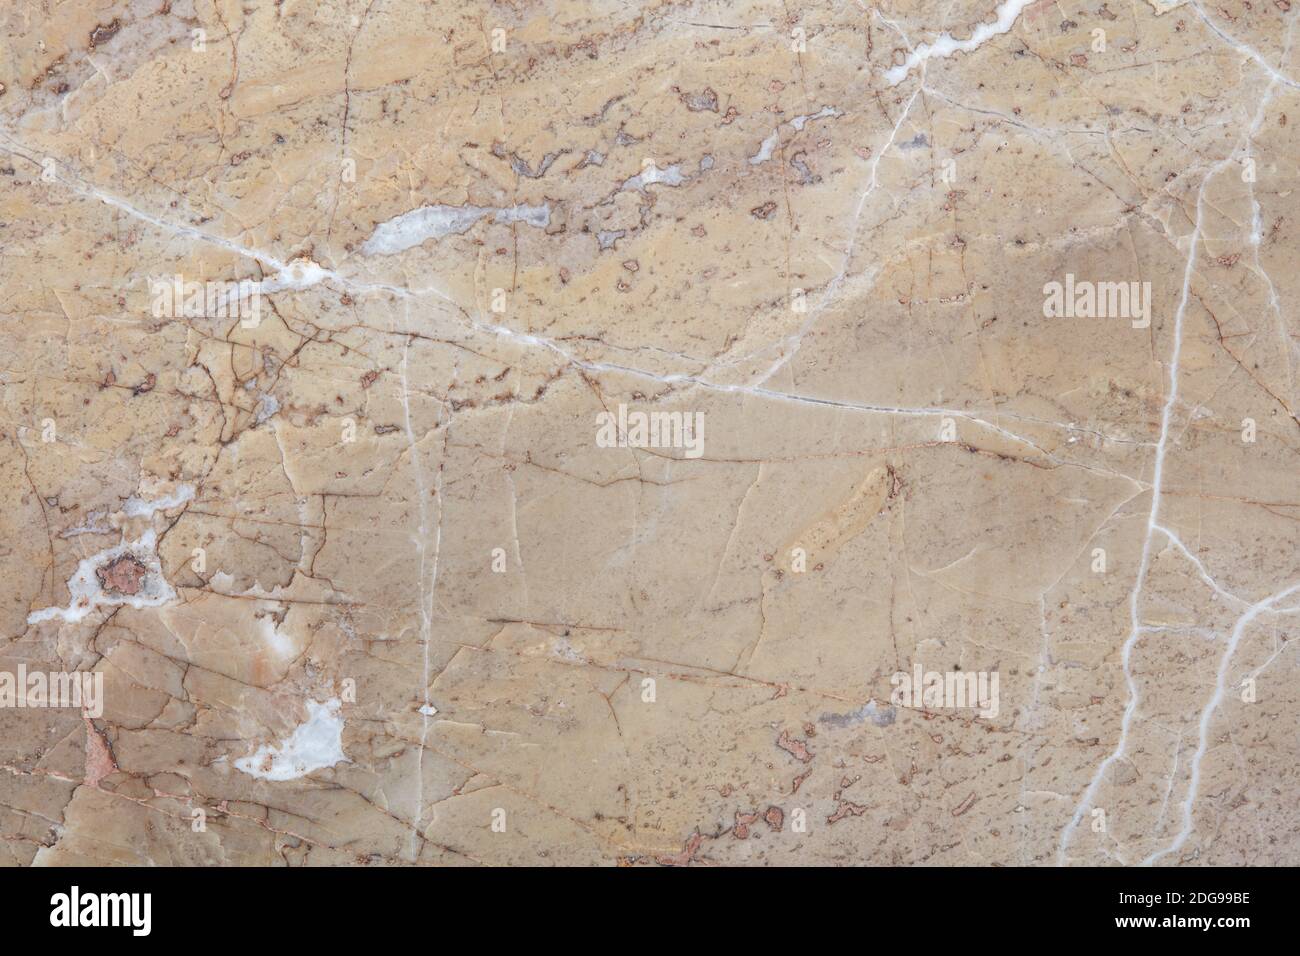 Beige, polished stone texture background with white veins Stock Photo